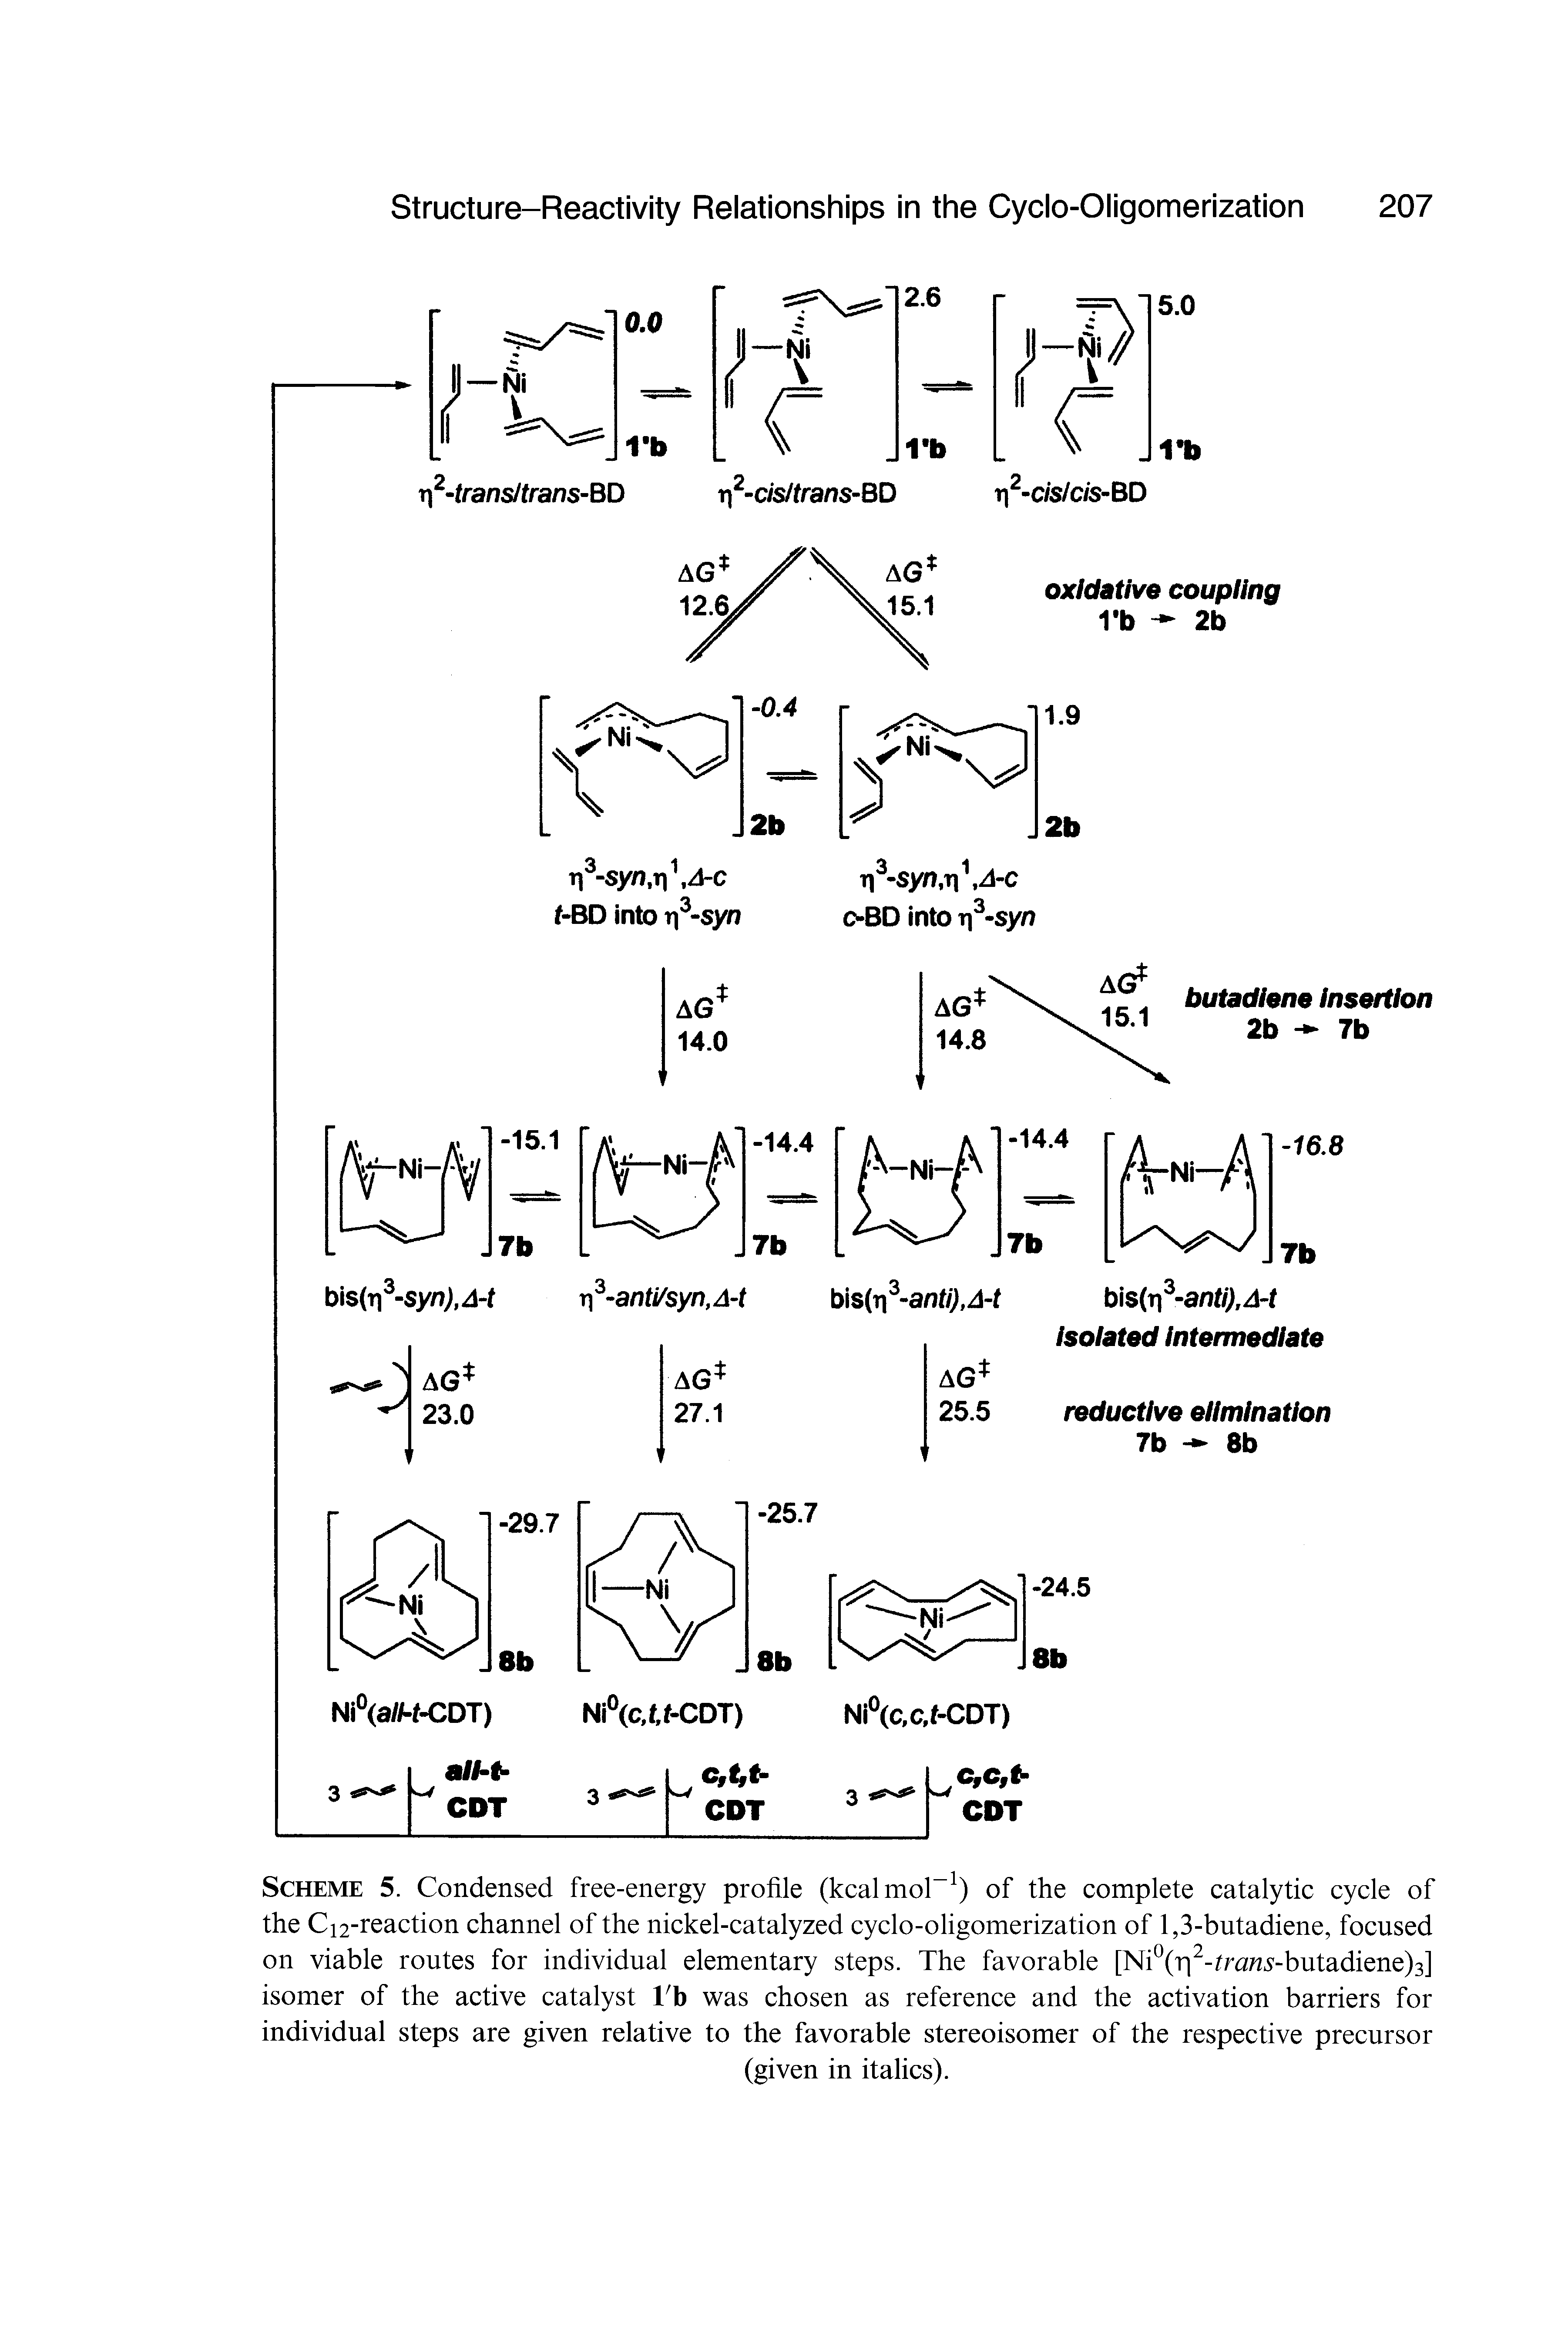 Scheme 5. Condensed free-energy profile (kcalmol-1) of the complete catalytic cycle of the Ci2-reaction channel of the nickel-catalyzed cyclo-oligomerization of 1,3-butadiene, focused on viable routes for individual elementary steps. The favorable [Ni°(r 2-/r<2fts-butadiene)3] isomer of the active catalyst 1/b was chosen as reference and the activation barriers for individual steps are given relative to the favorable stereoisomer of the respective precursor...